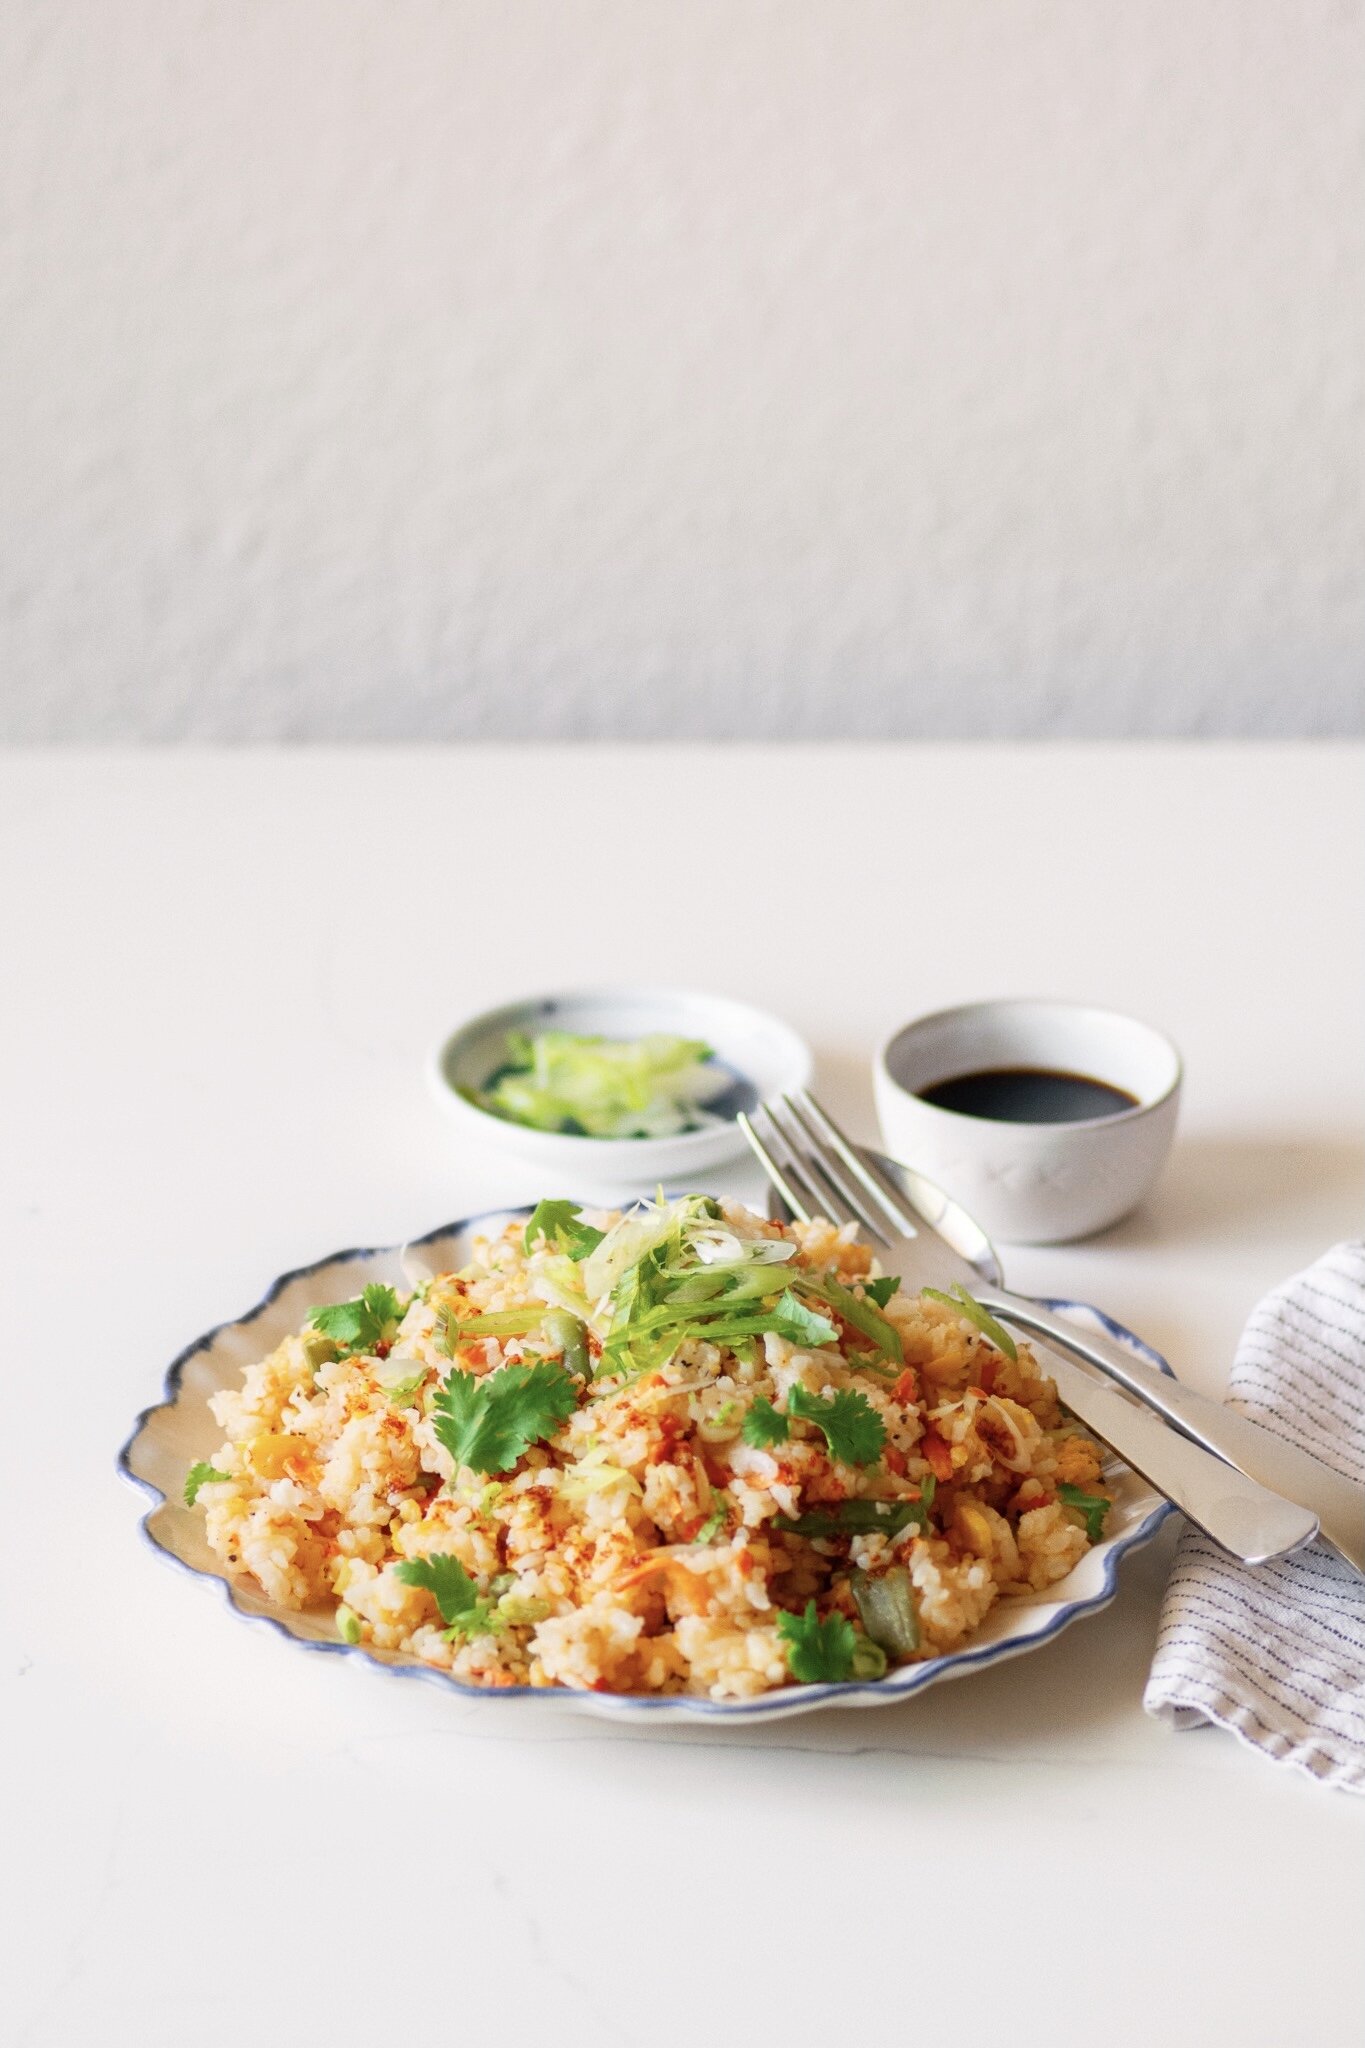 Plated Vegetable Fried Rice garnished with sliced scallions, cilantro and chili oil.